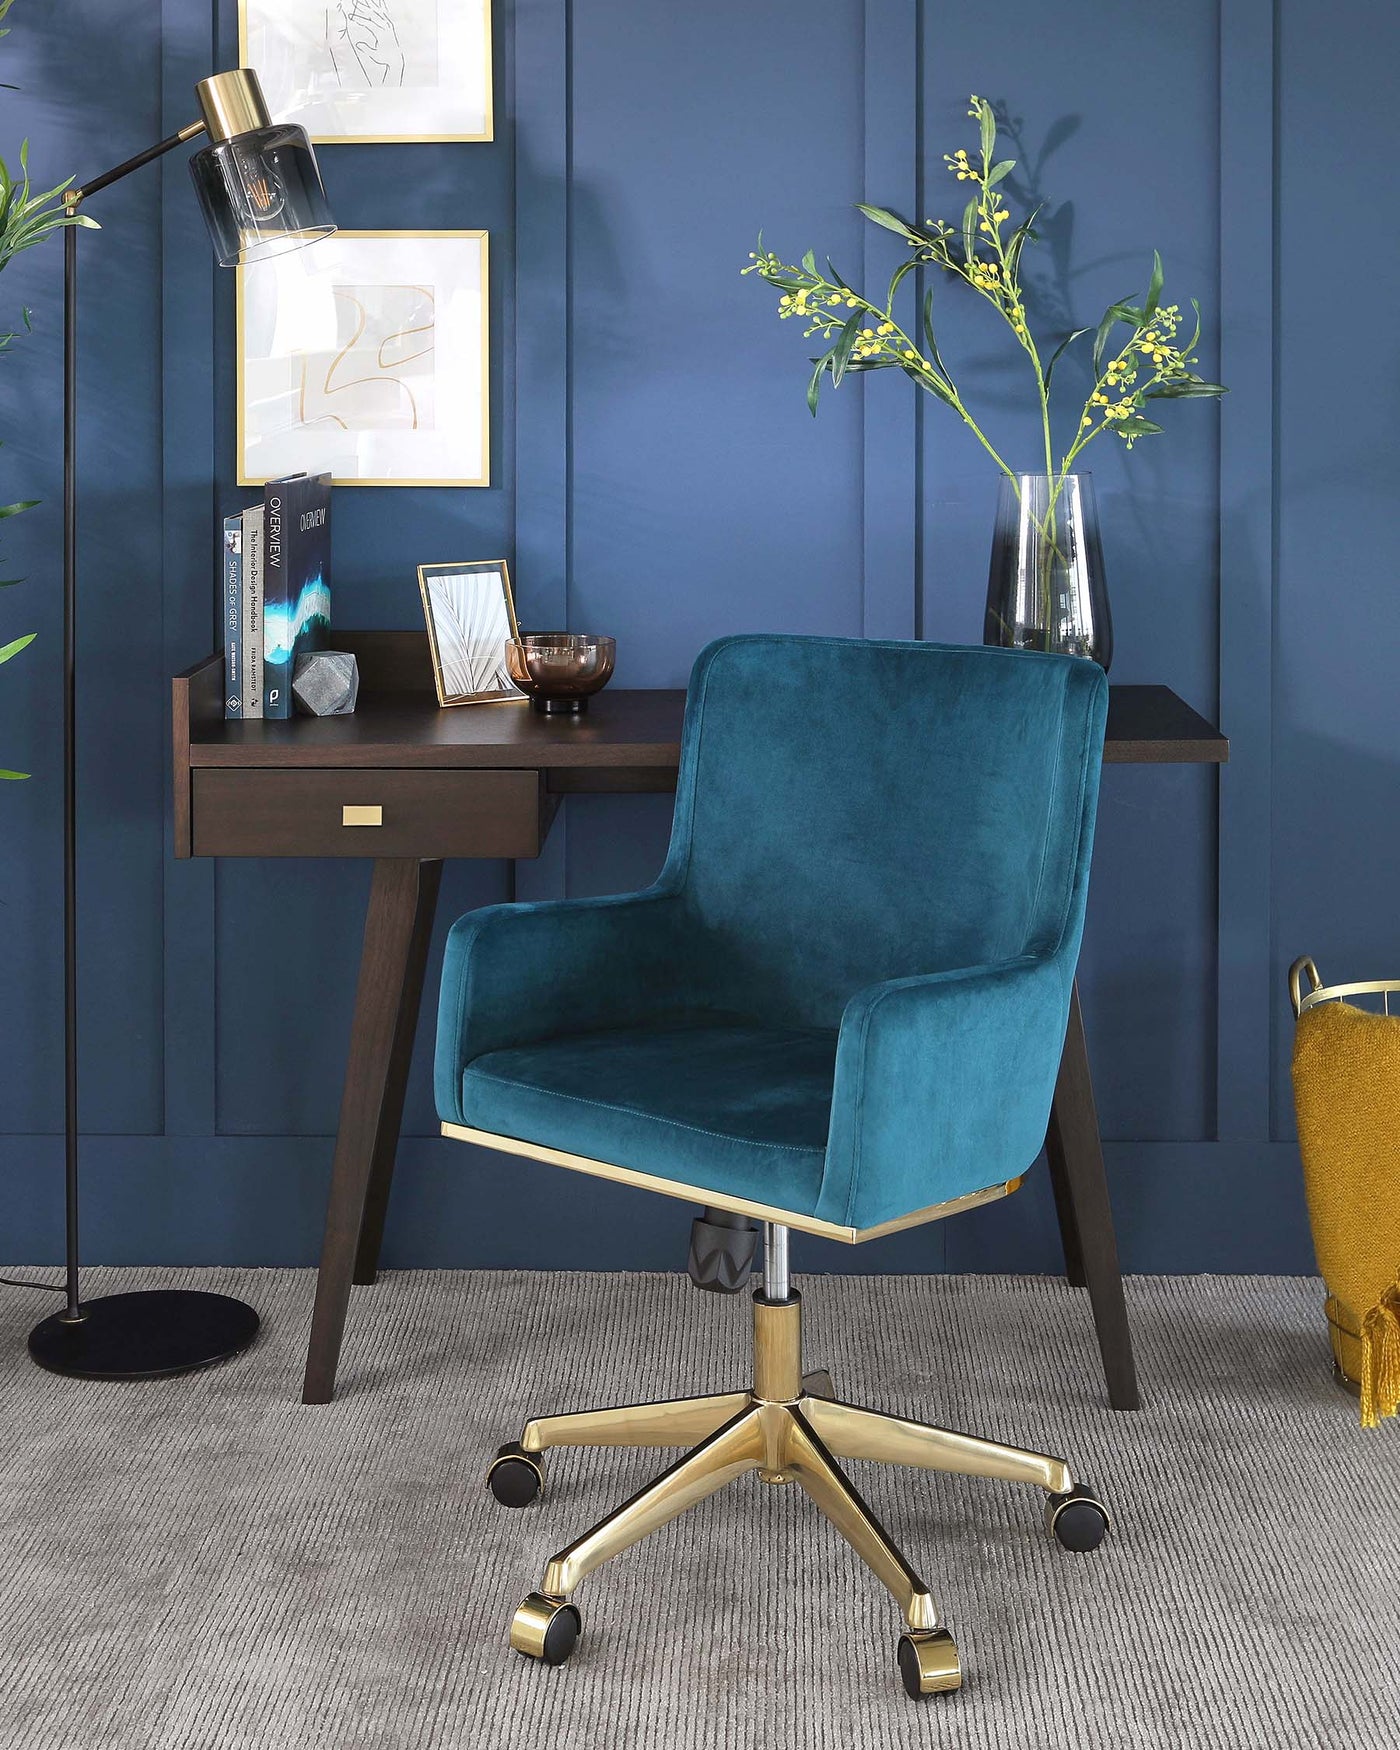 Luxurious teal blue velvet office chair with a high back and armrests, featuring a gold metal base with wheels, paired with a sleek dark brown wooden console table with a single drawer and brass handle.